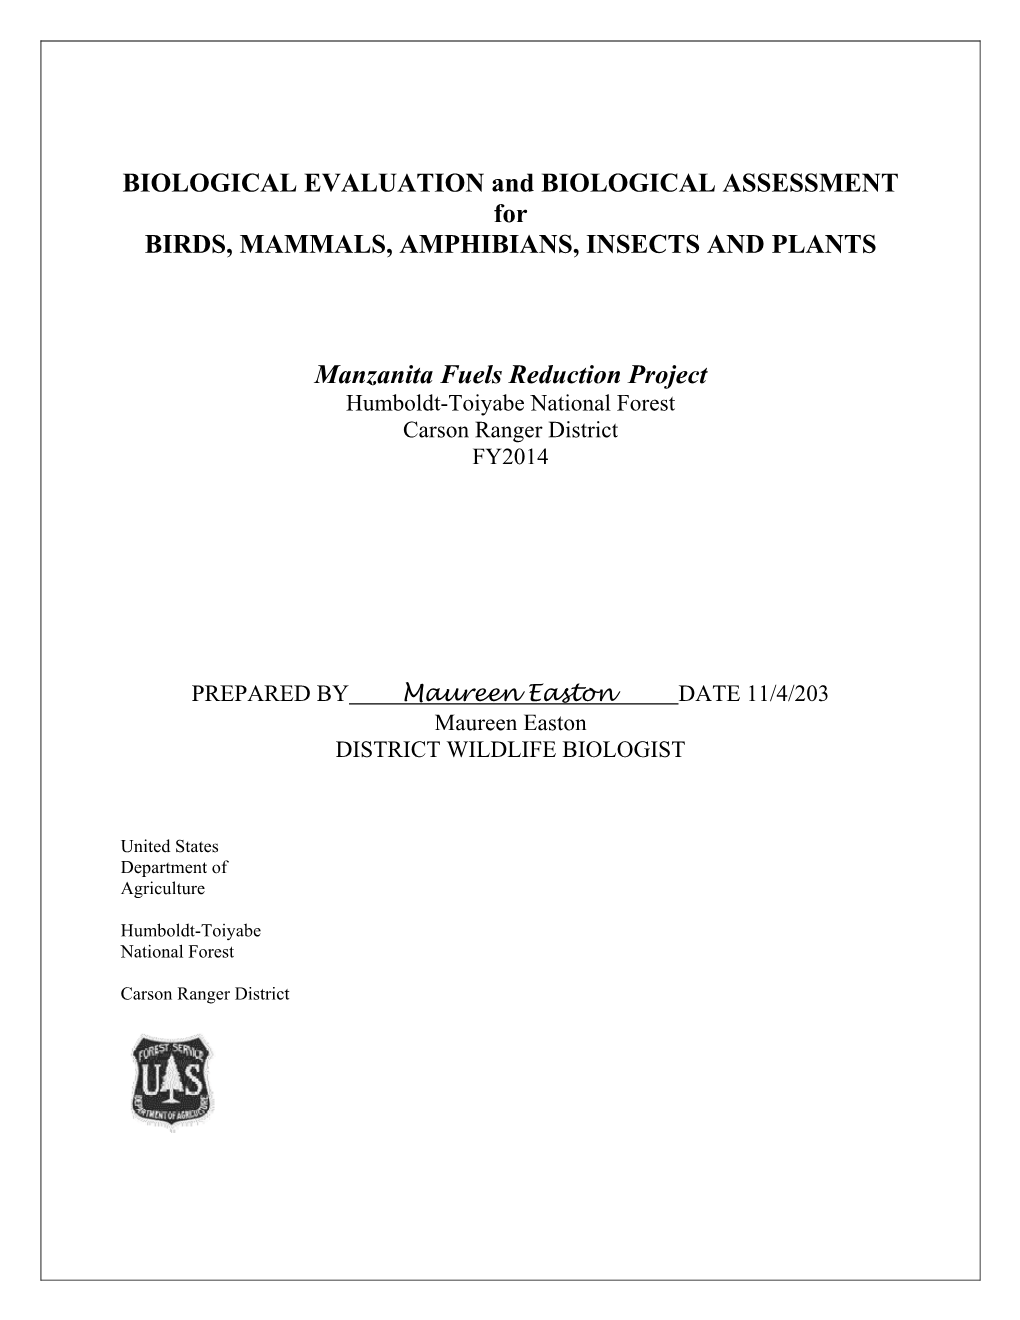 BIOLOGICAL EVALUATION and BIOLOGICAL ASSESSMENT for BIRDS, MAMMALS, AMPHIBIANS, INSECTS and PLANTS